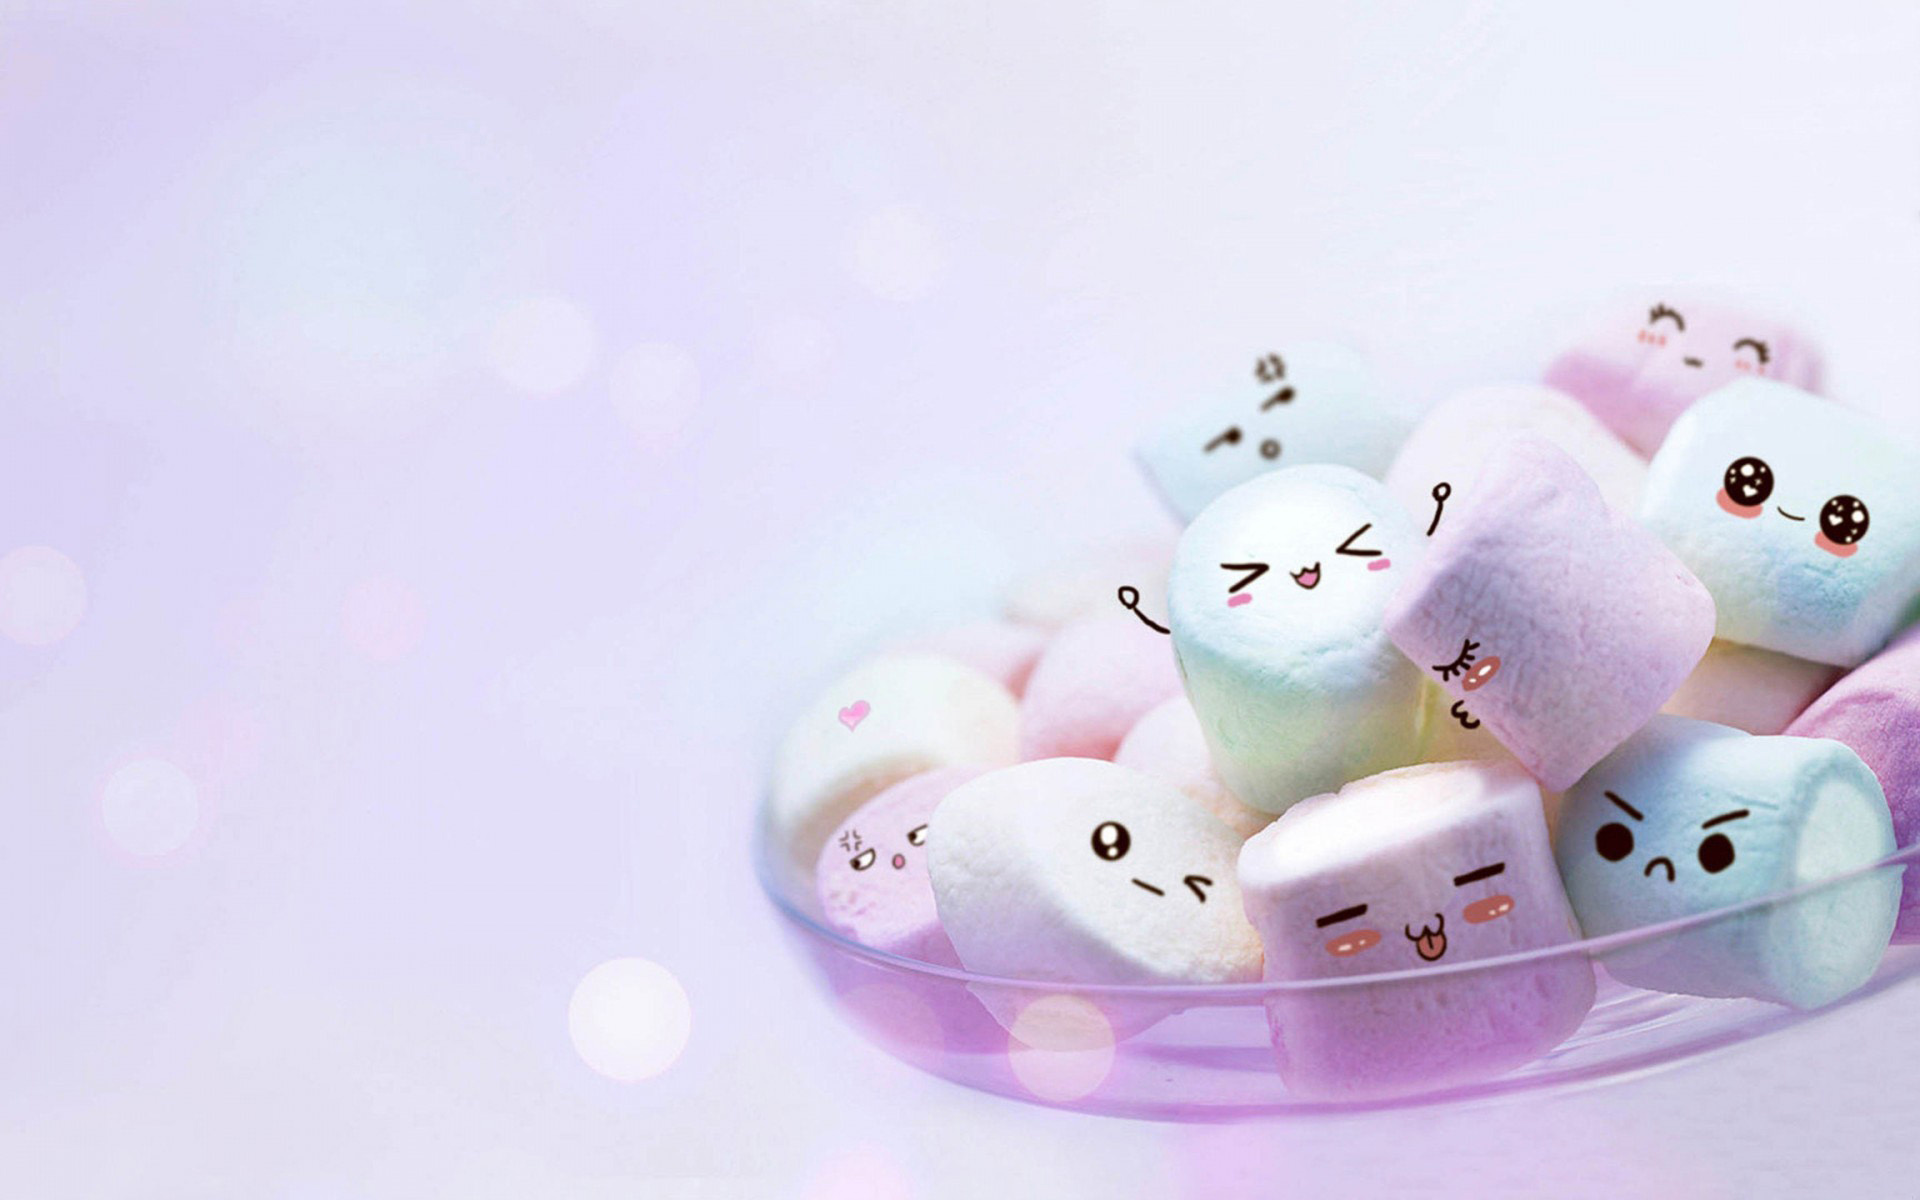 Marshmallow: Spongy confection, A sweet which got its name from the mallow plant. 1920x1200 HD Wallpaper.